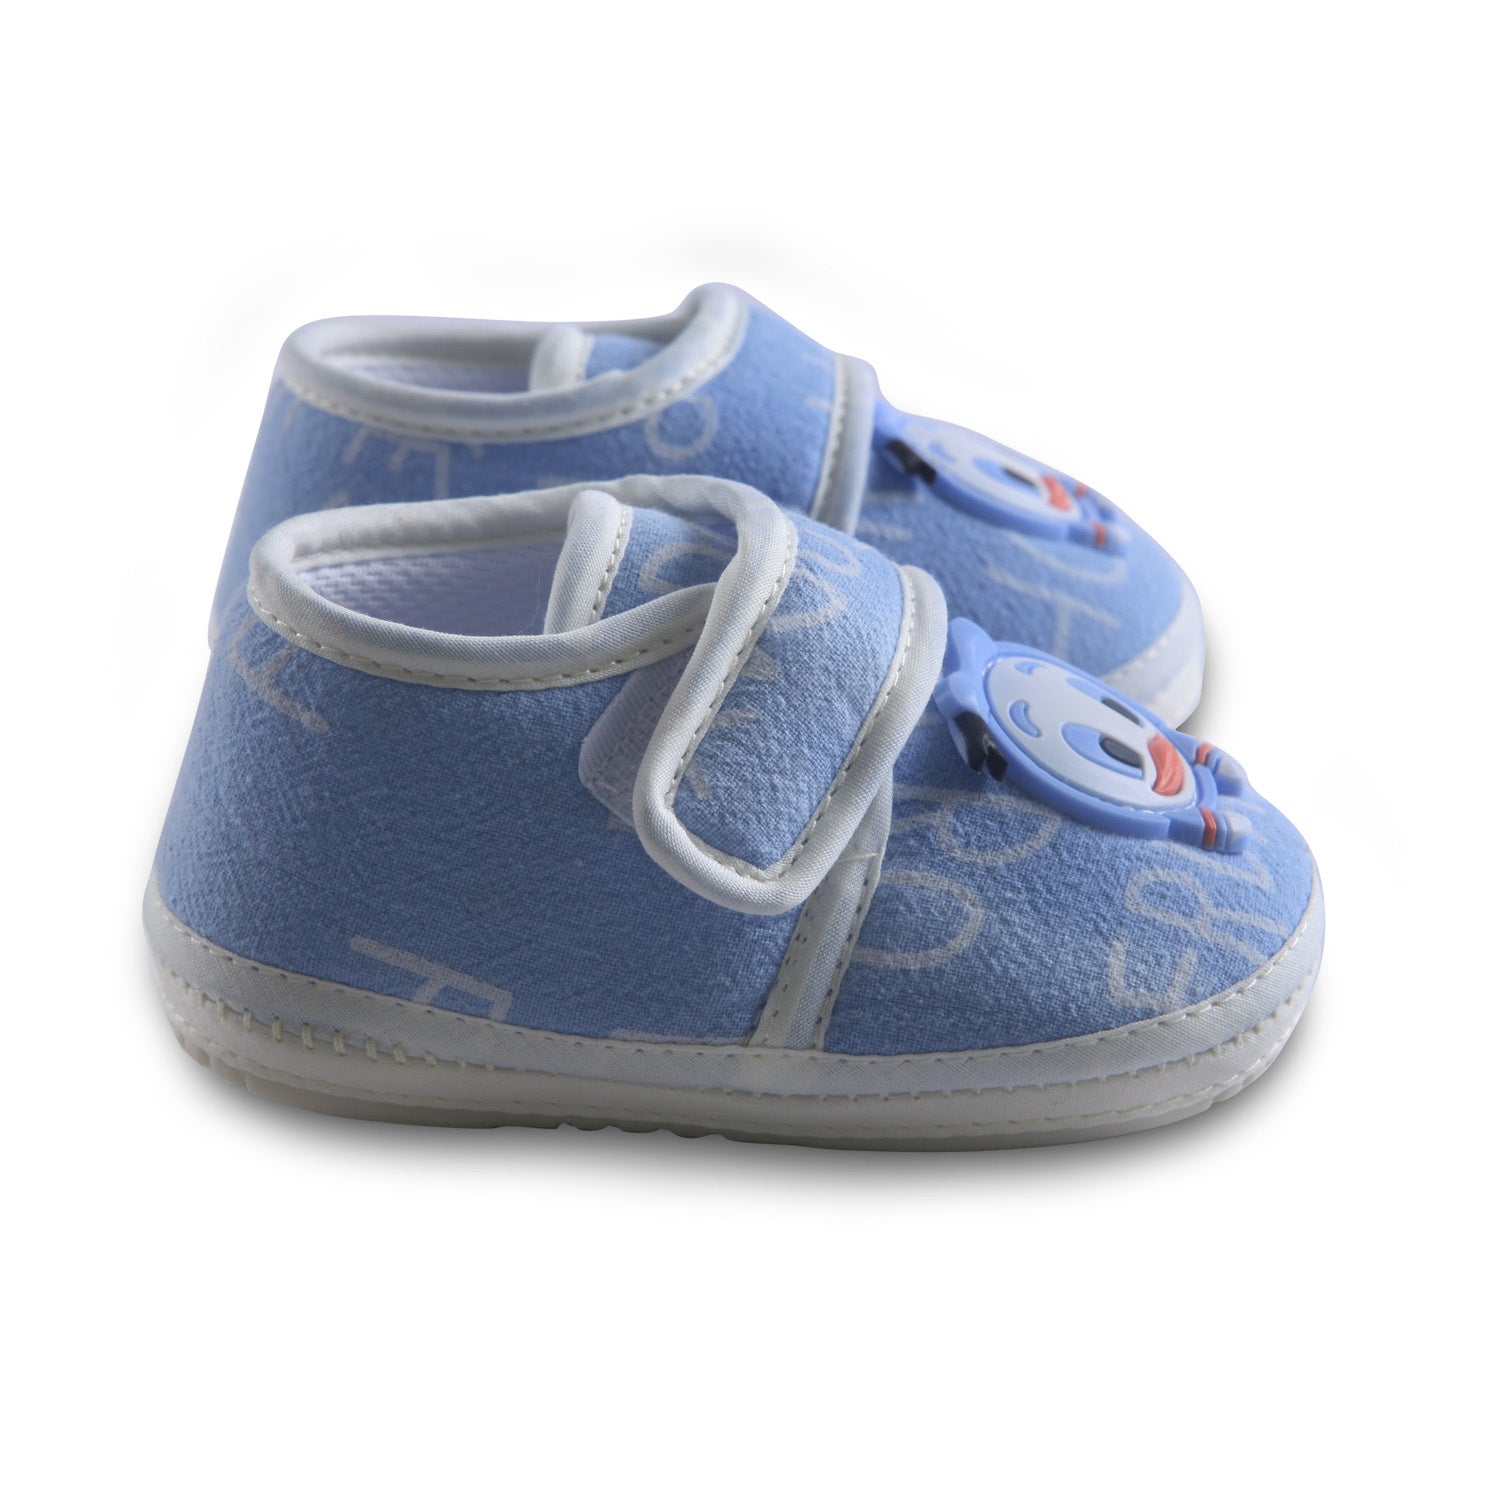 Non-slip Booties with Strap Kids Shoes Duck - Blue - Baby Moo